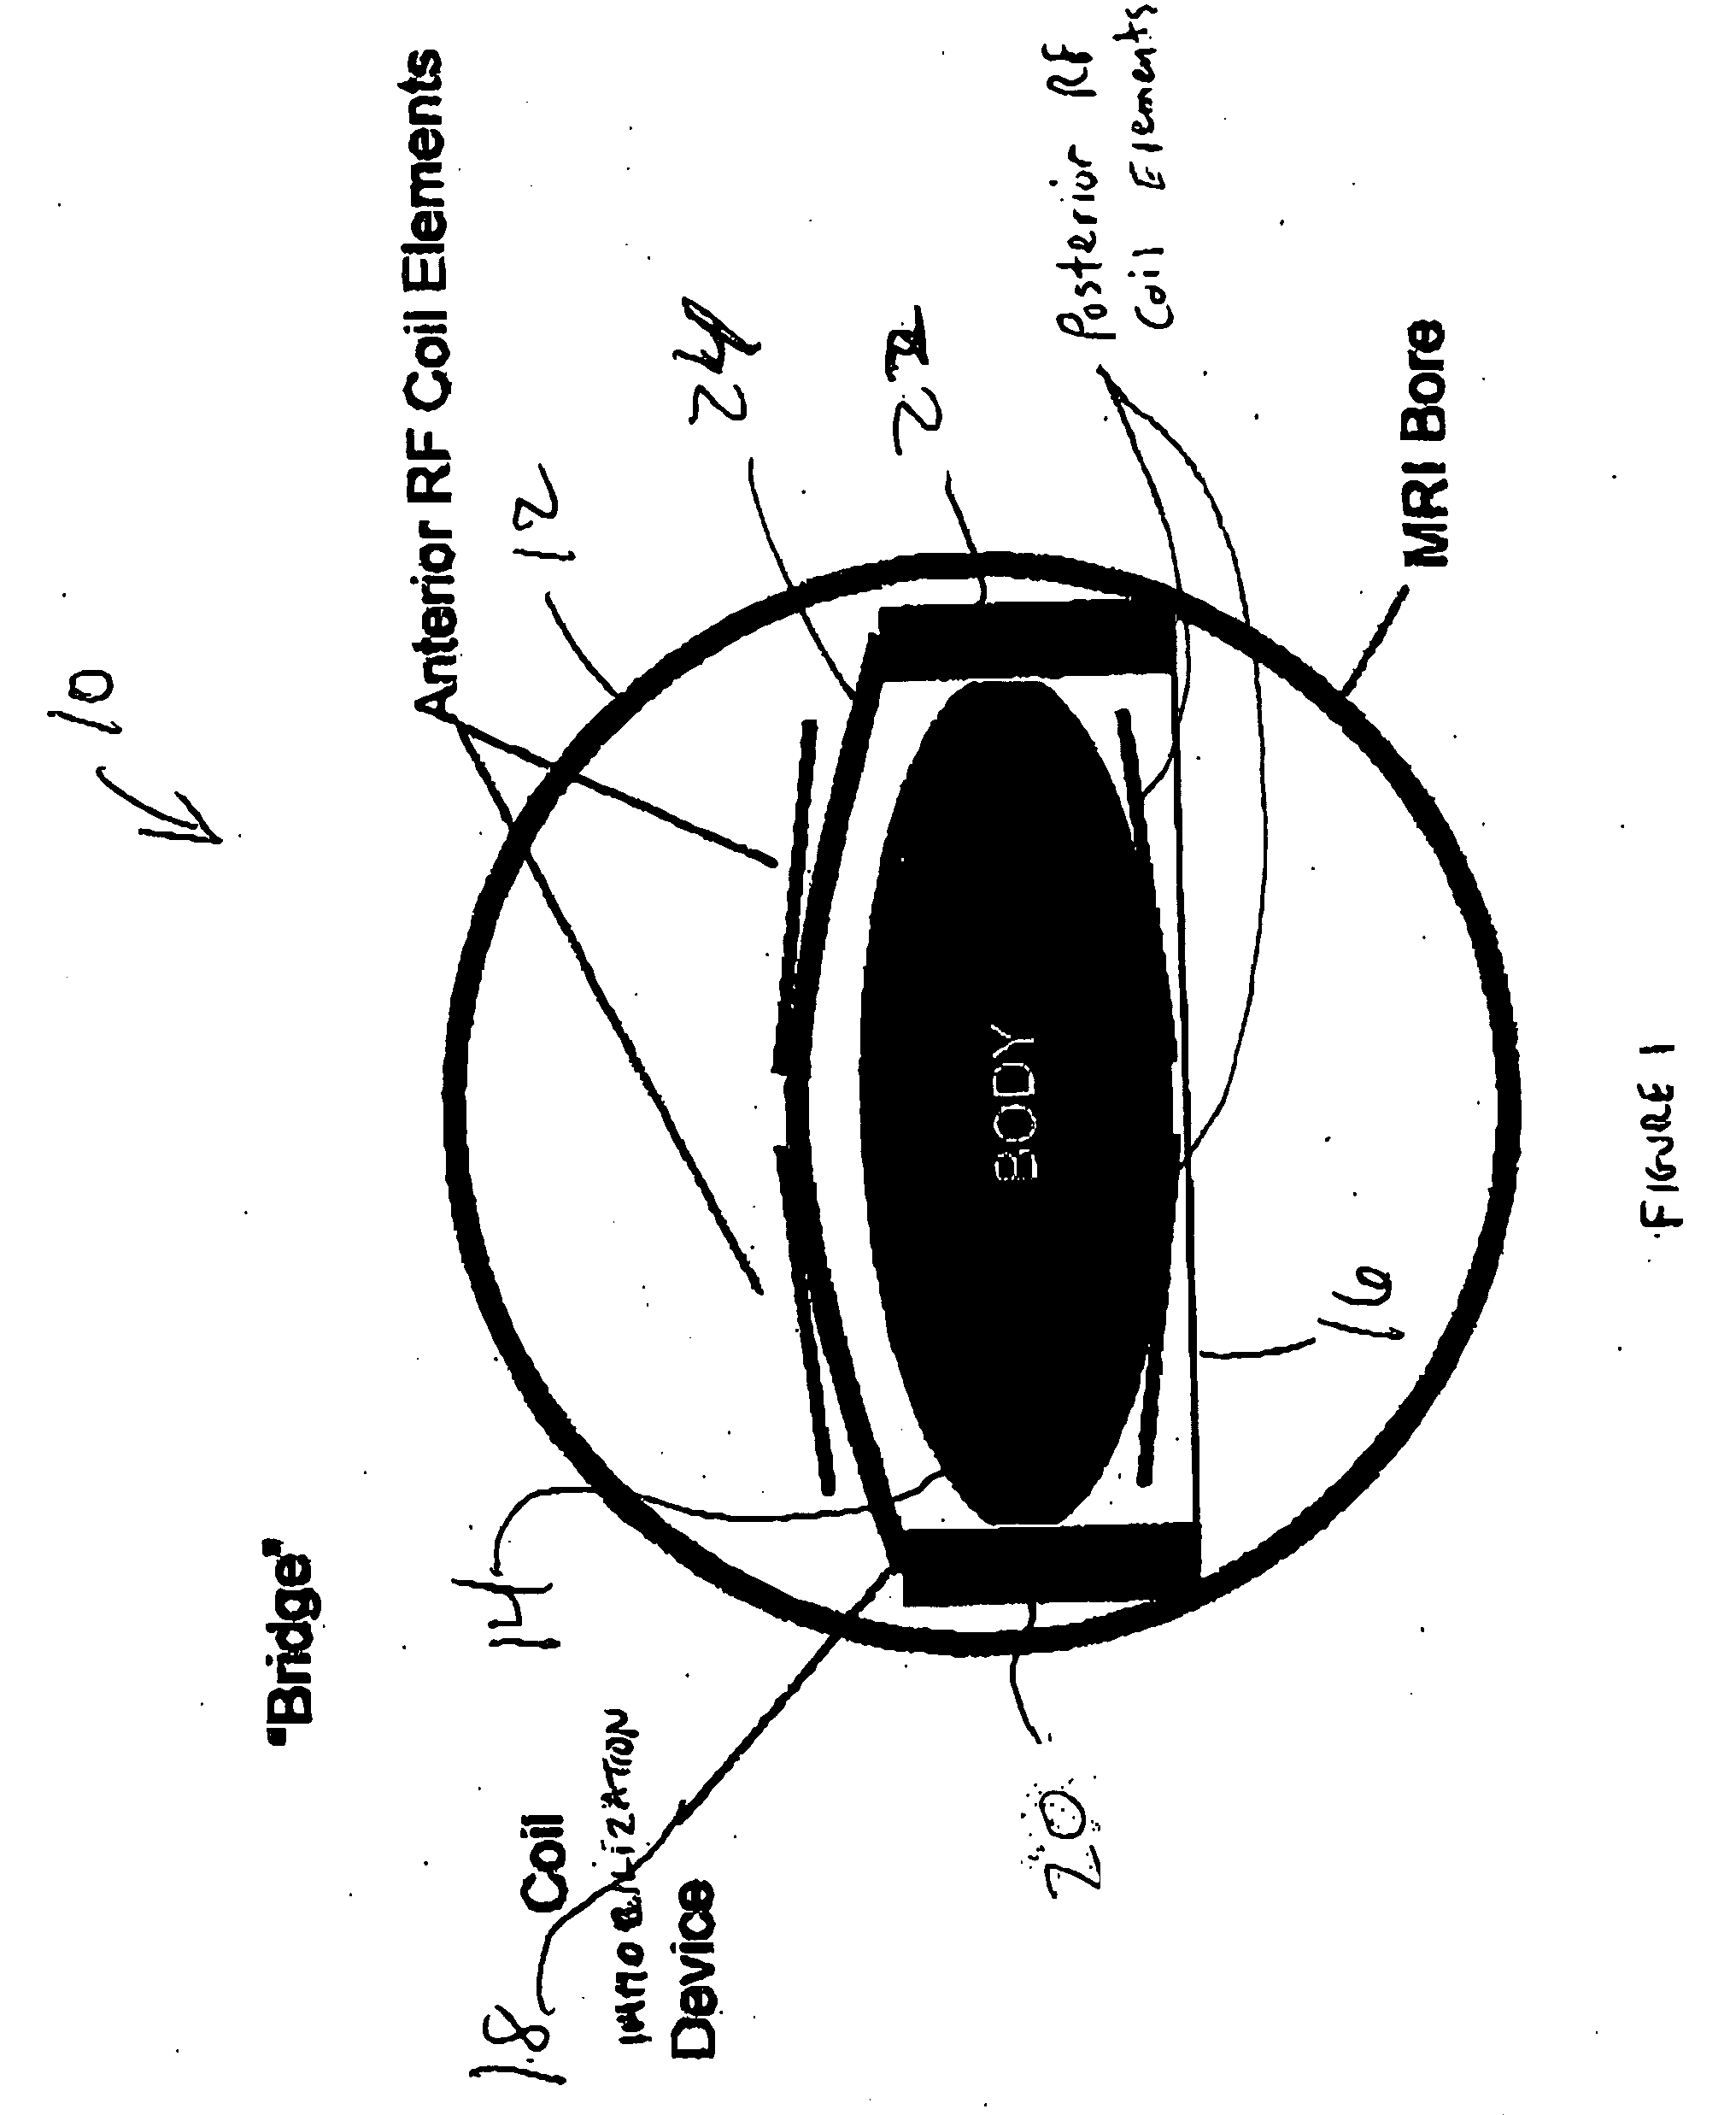 Device for enabling reduced motion-related artifacts in parallel magnetic resonance imaging